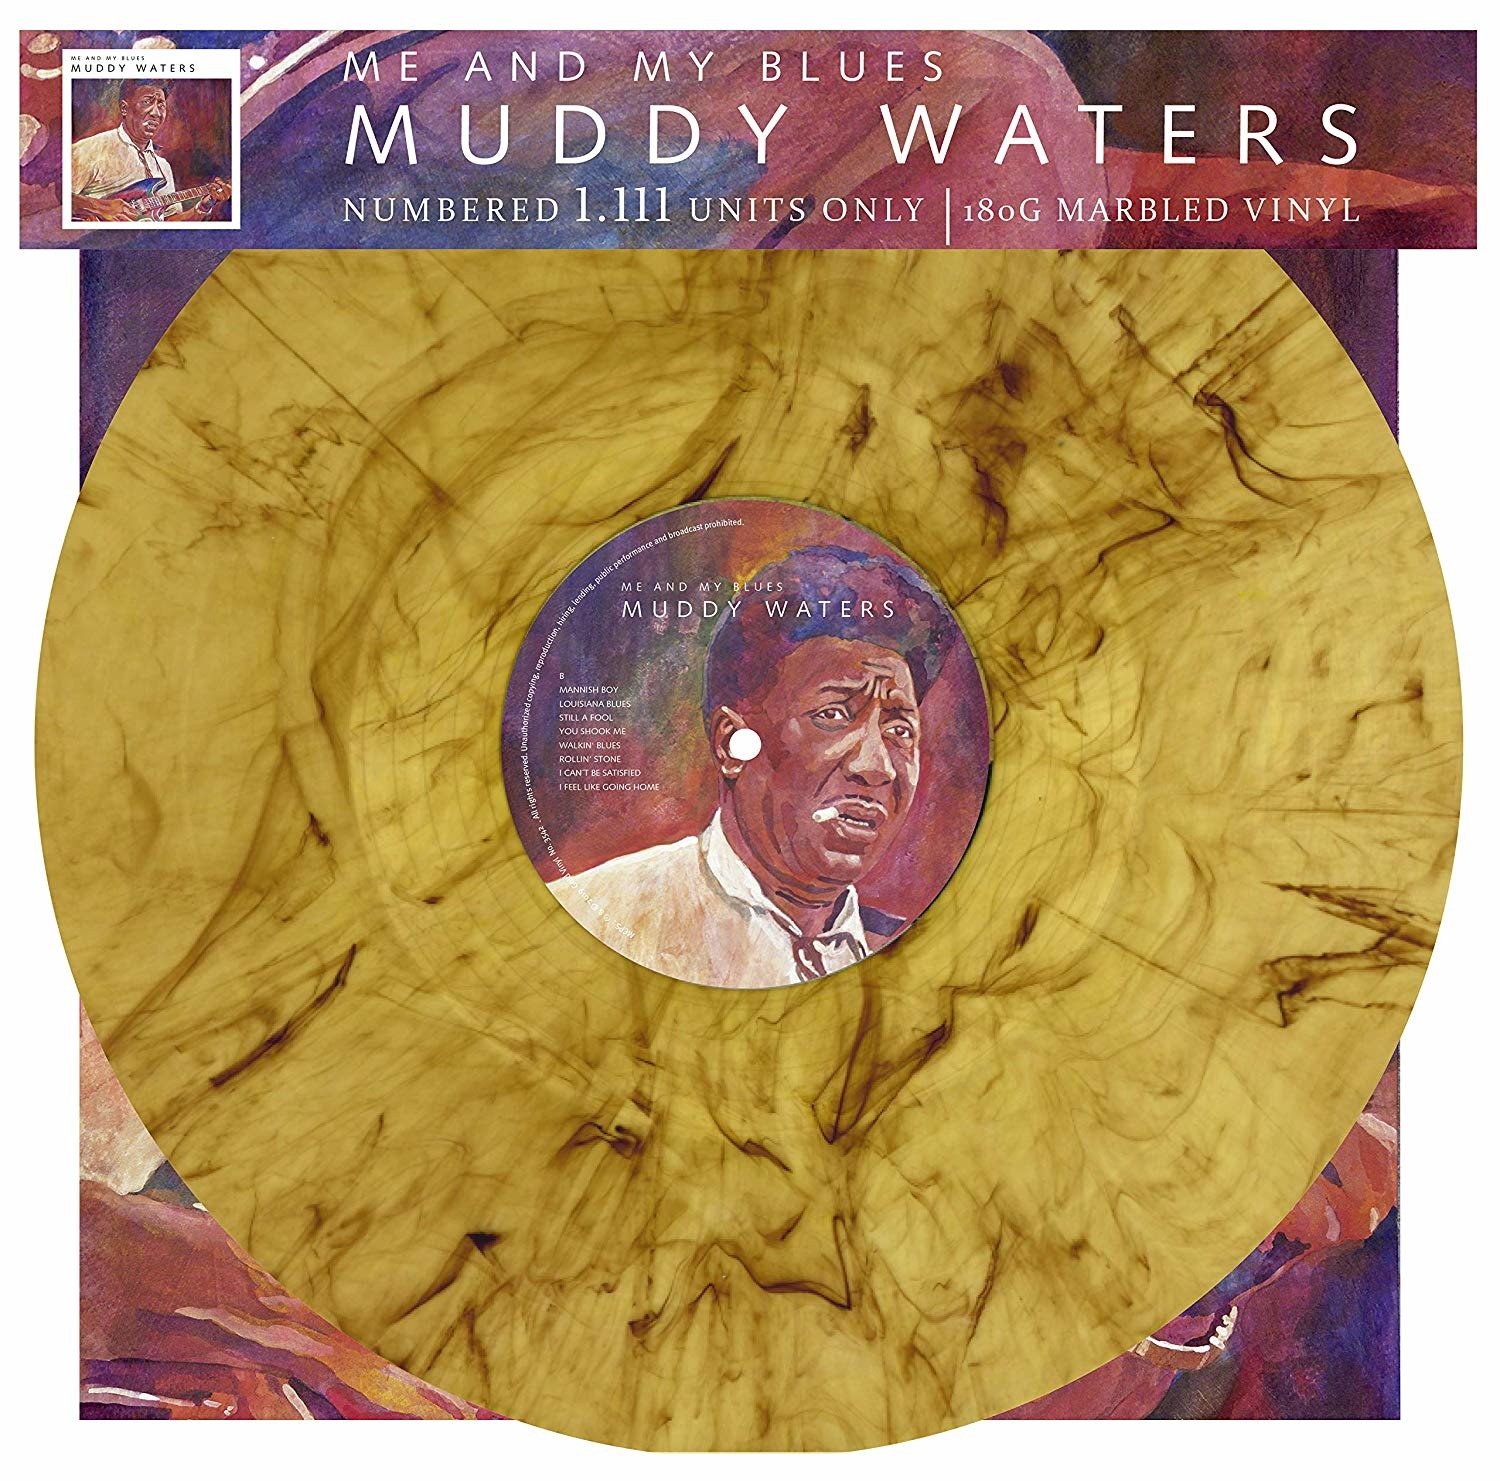 CD Shop - WATERS, MUDDY ME AND MY BLUES